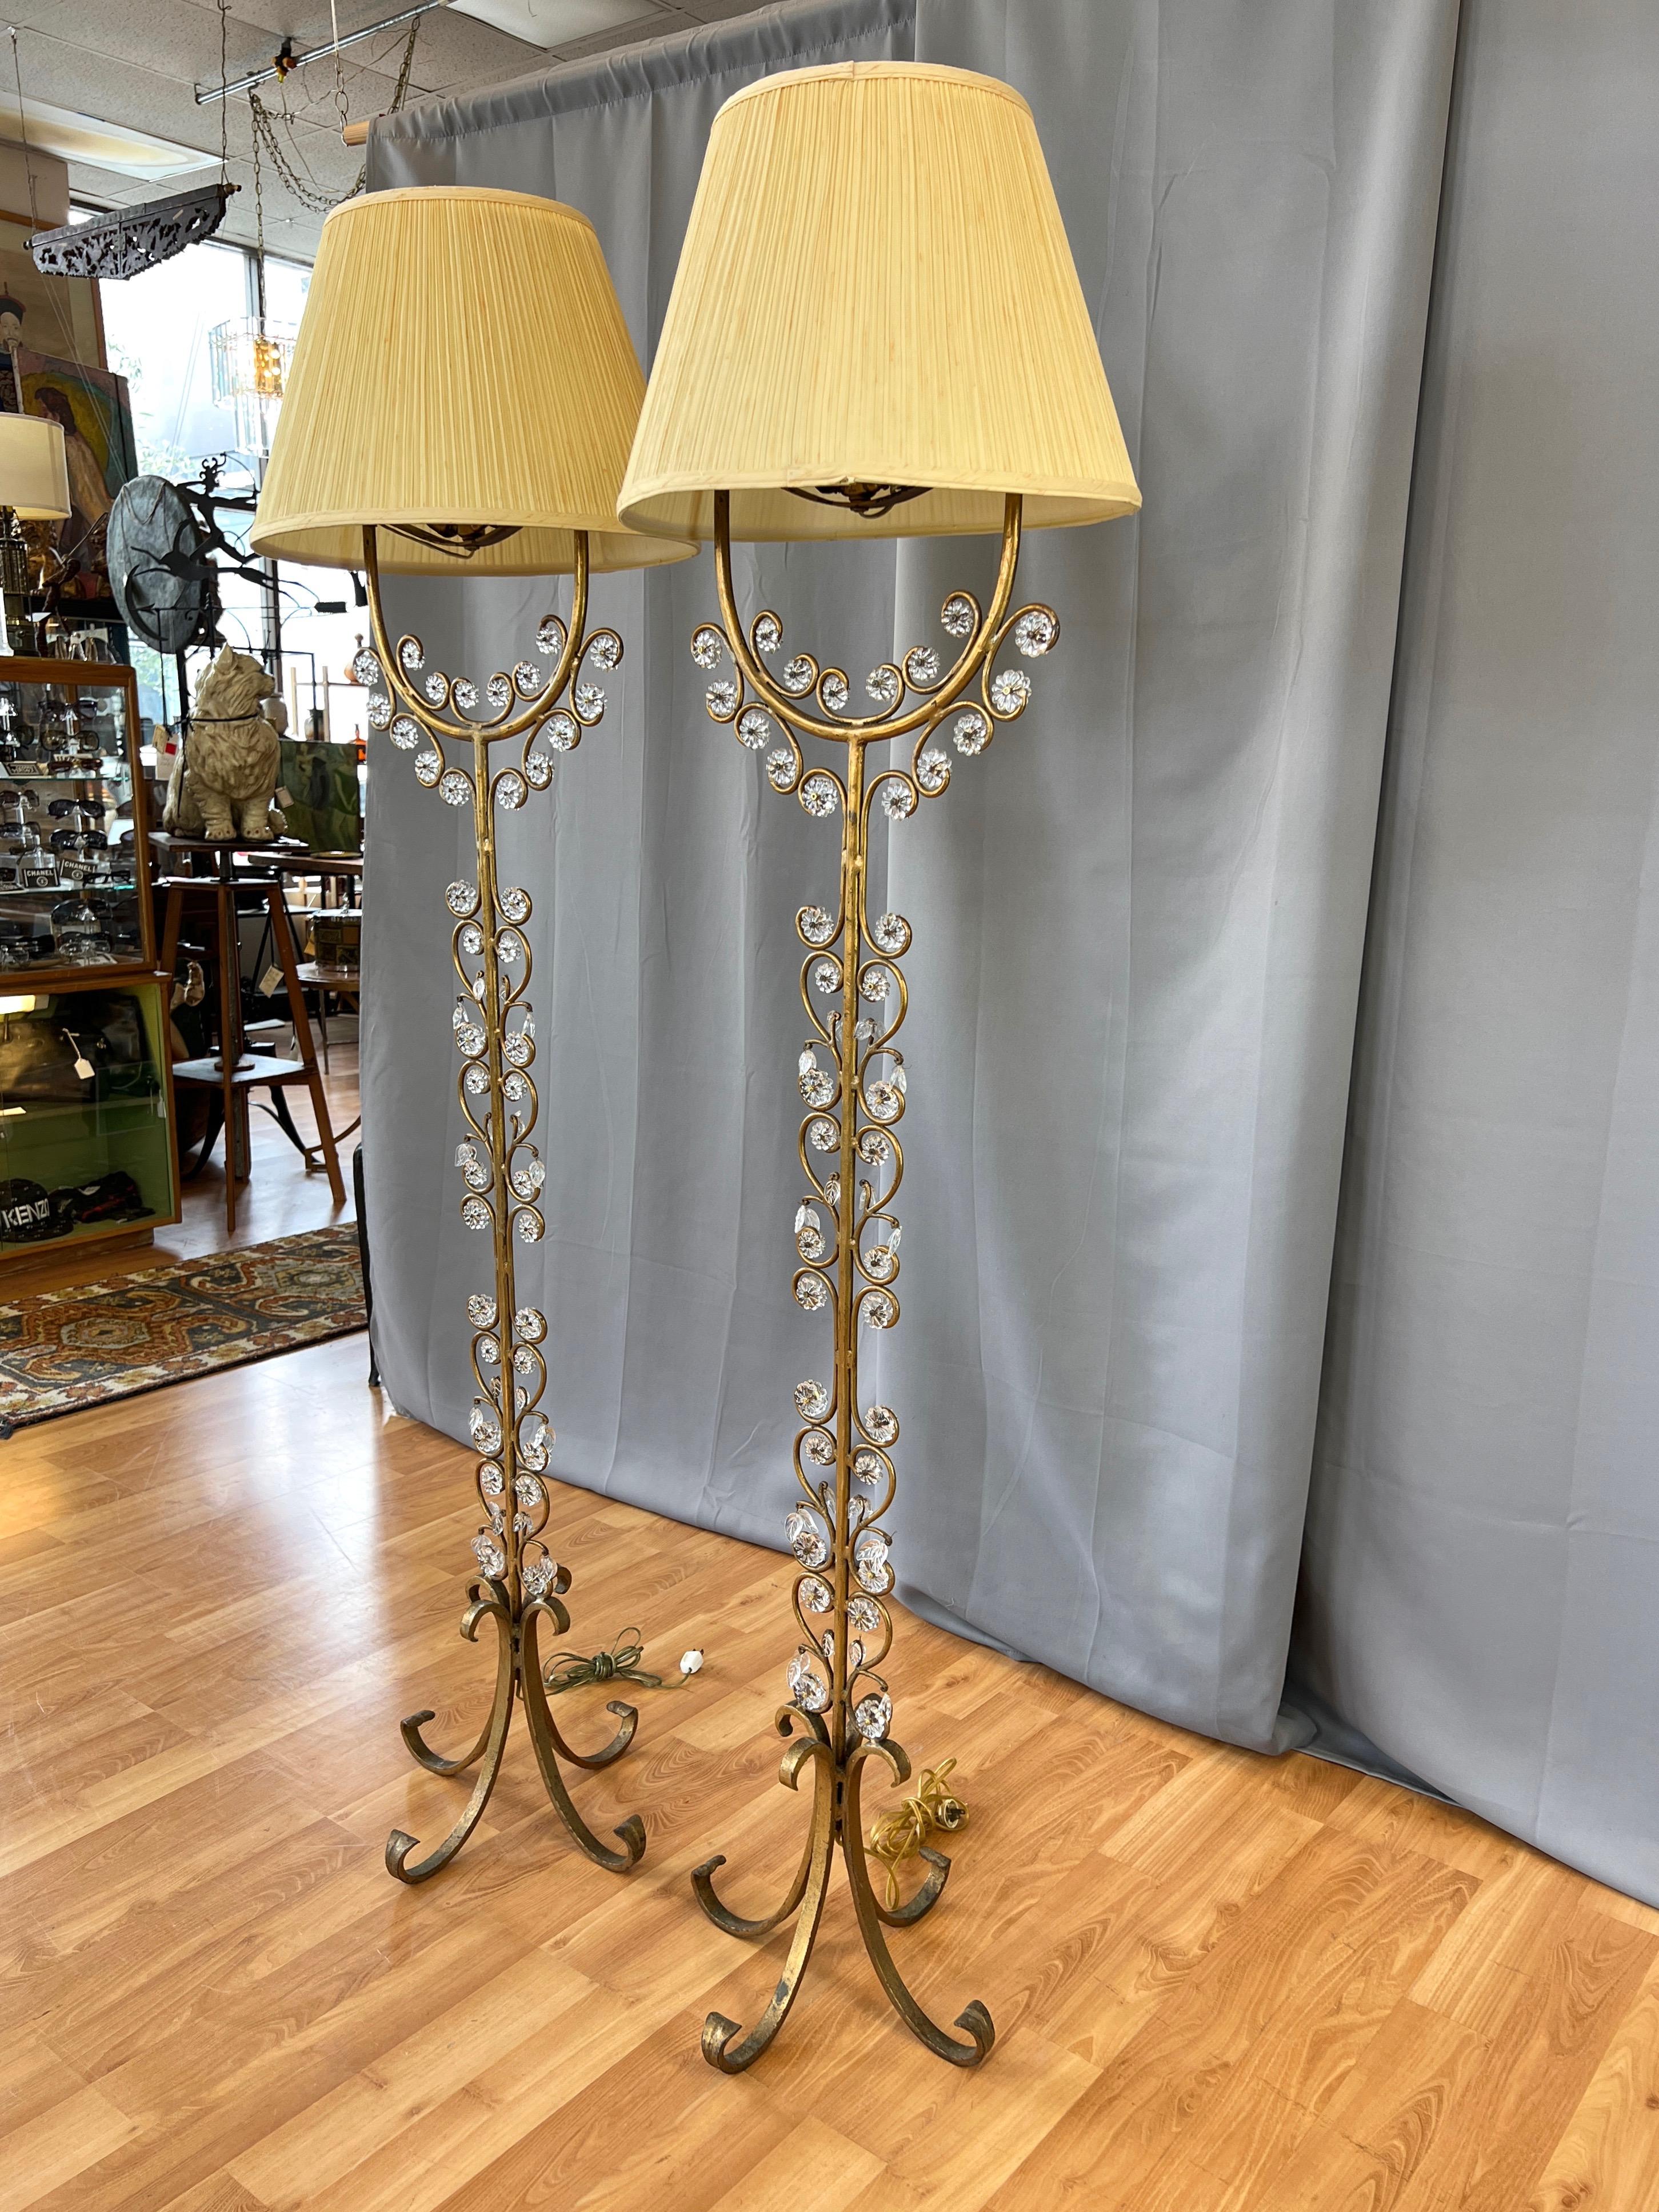 Pair of Italian Gilt Wrought Iron Floor Lamps with Glass Florets & Leaves, 1950s In Good Condition For Sale In San Francisco, CA